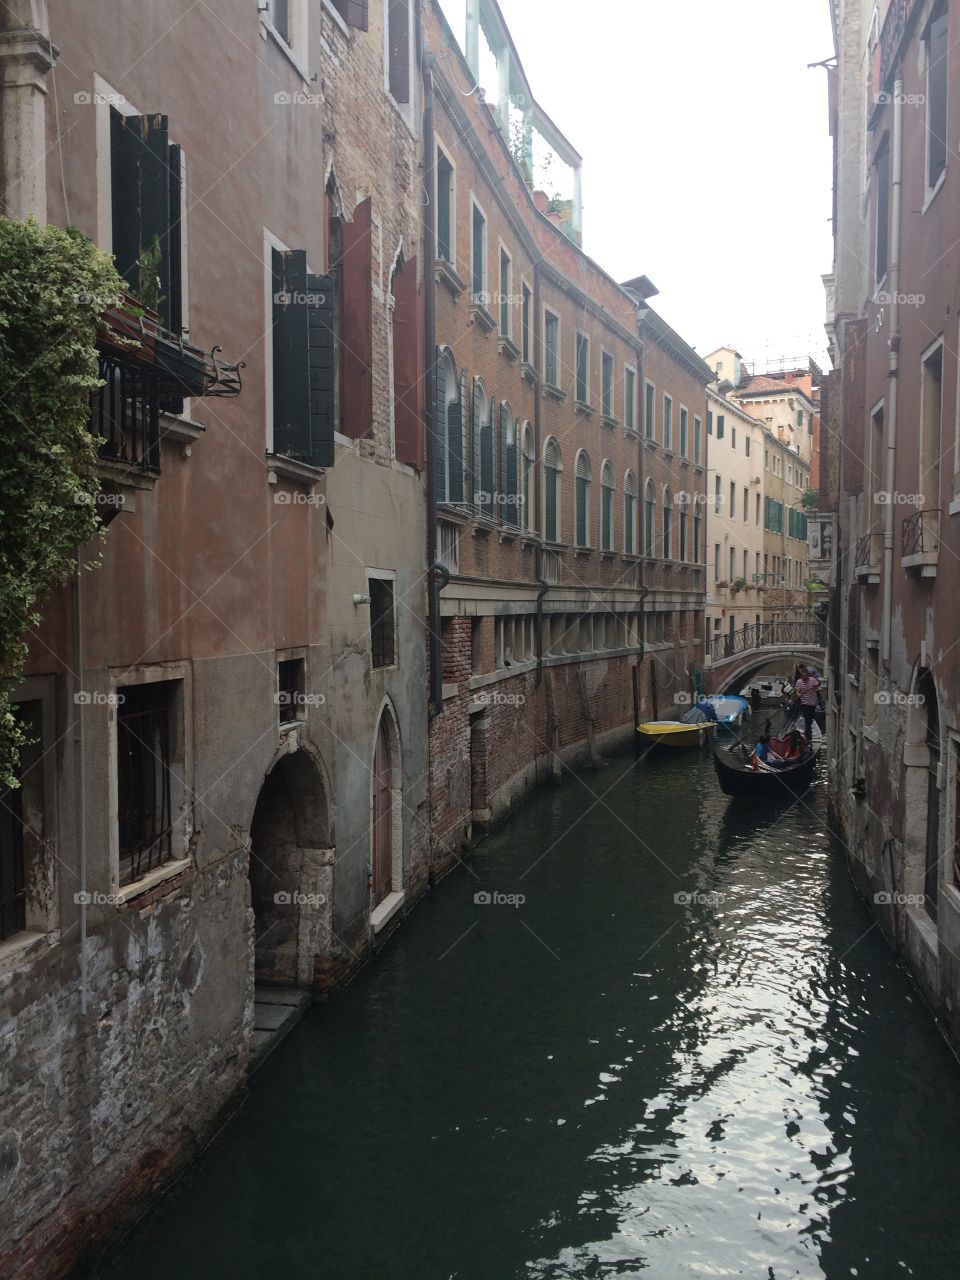 A narrow canal in Venice. Truly captures the character and feel of this beautiful city